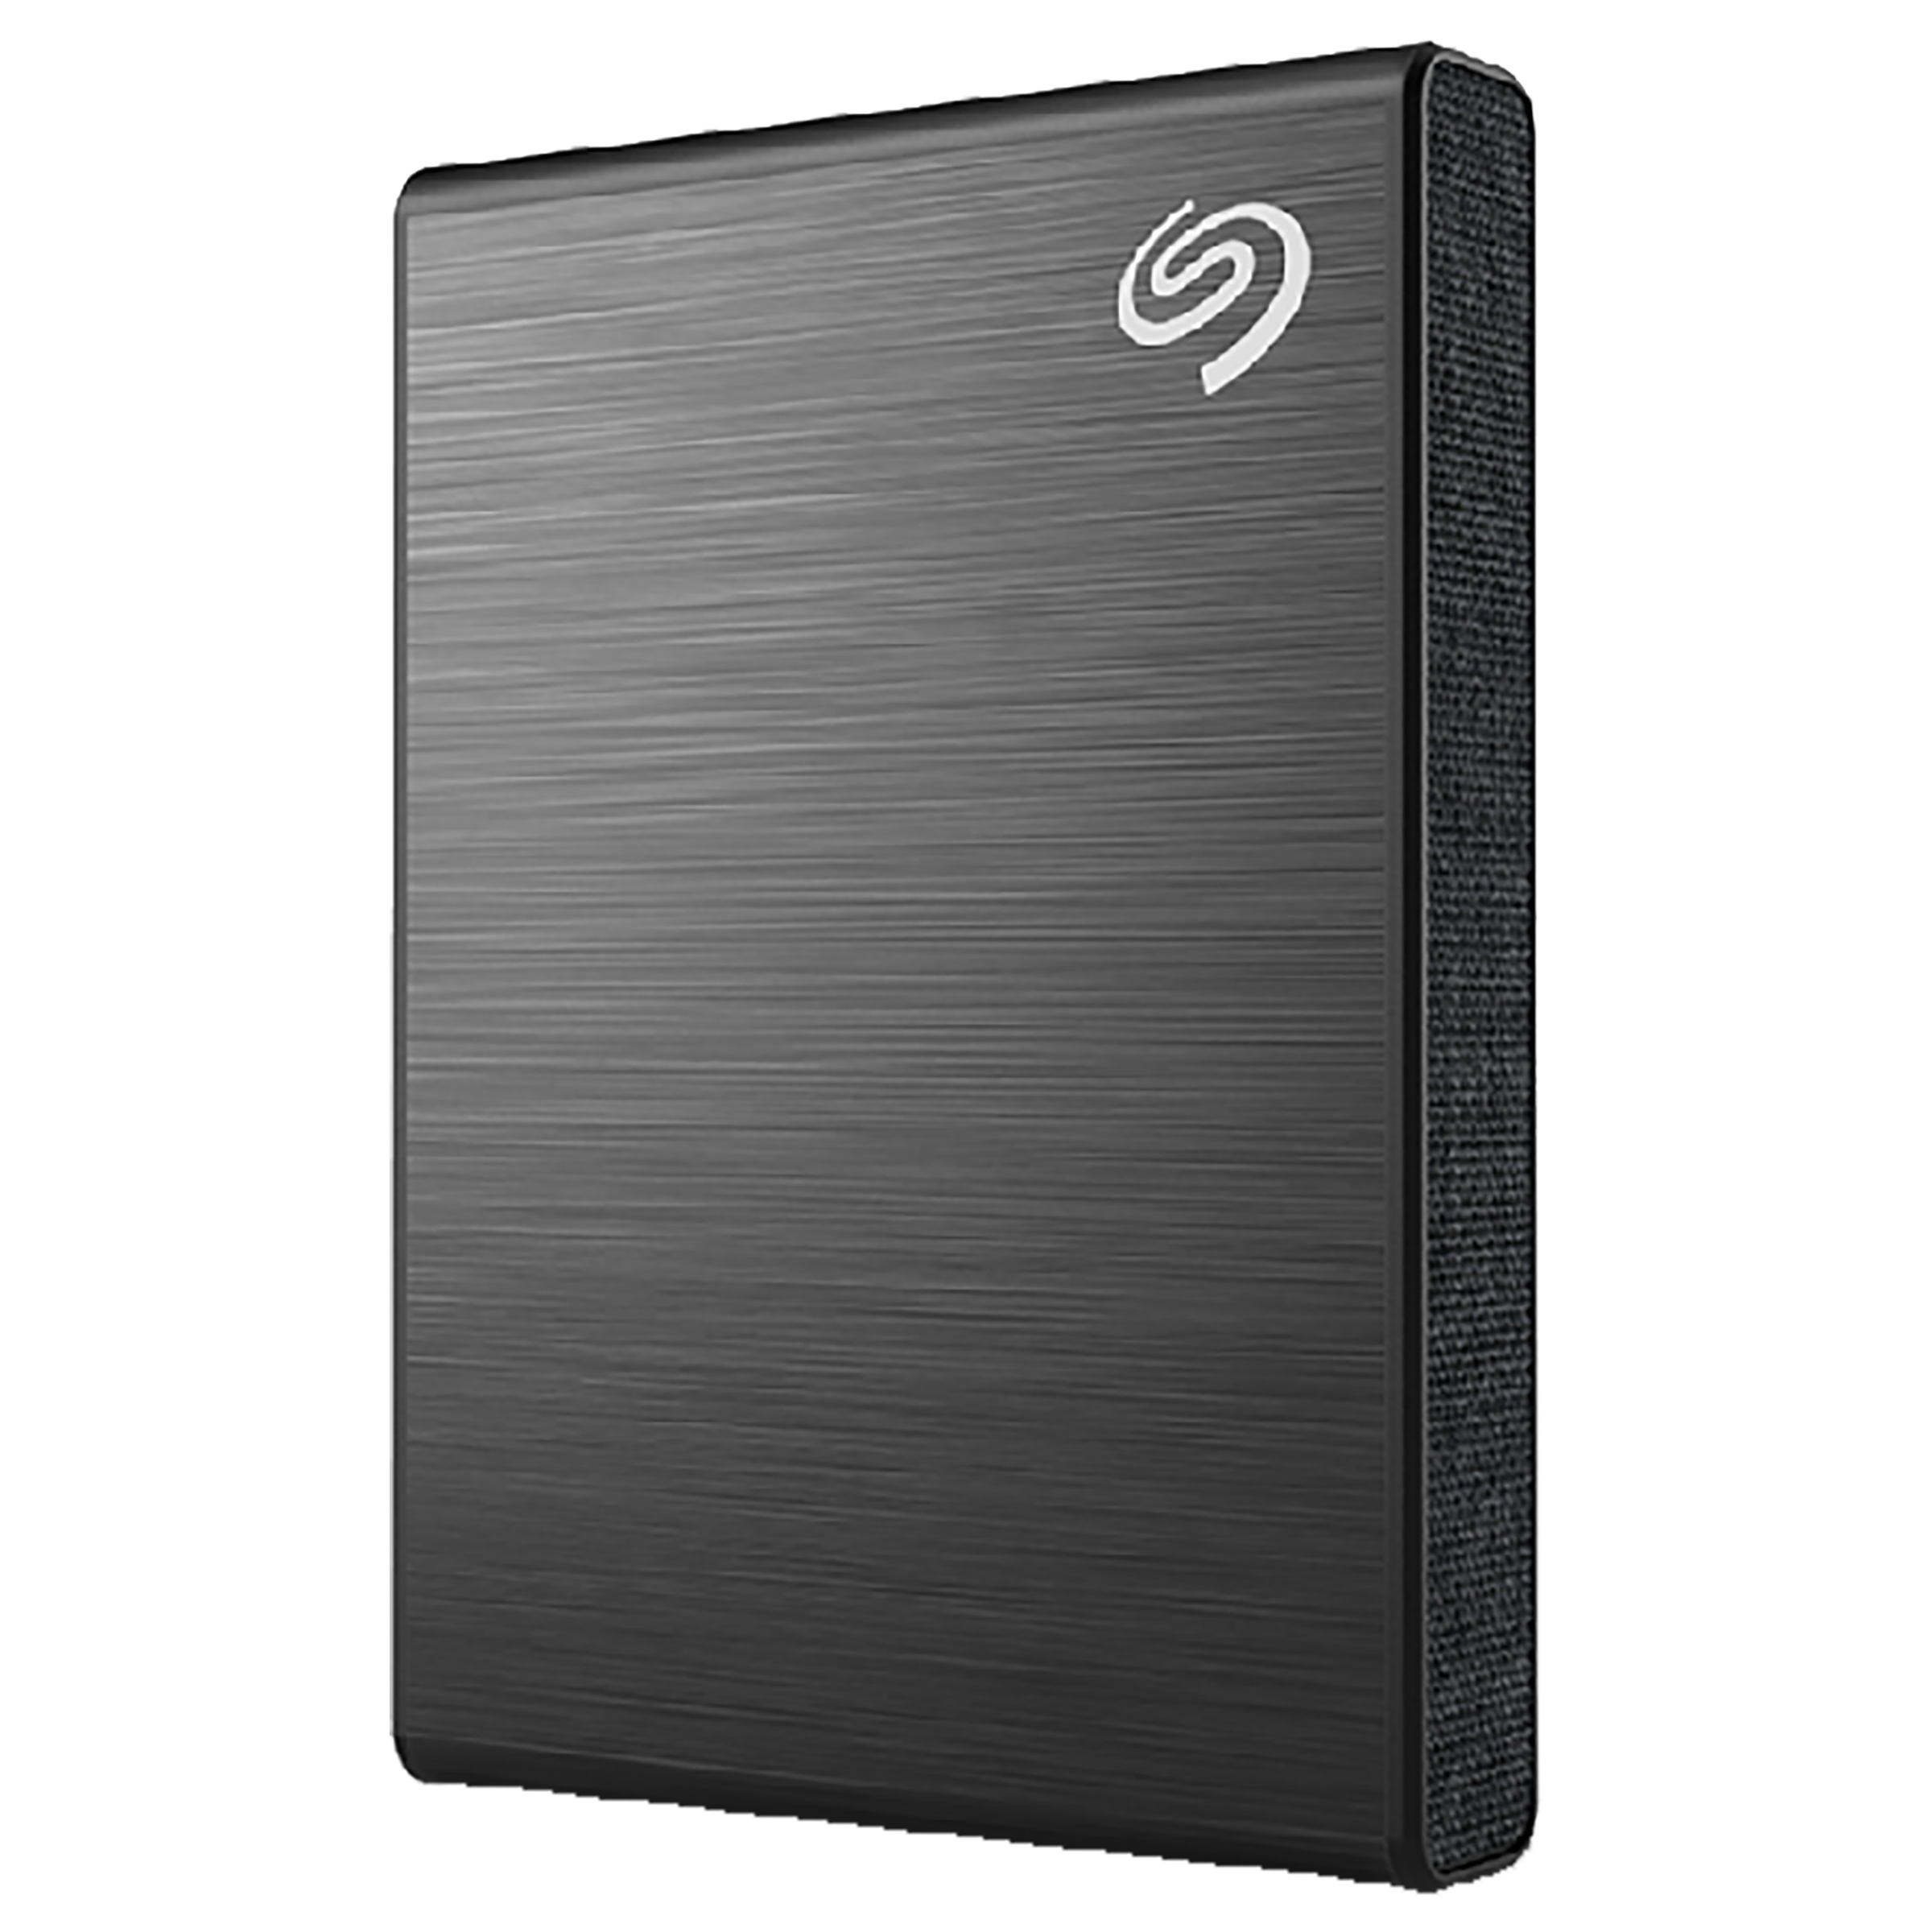 Seagate One Touch 1TB USB 3.0 Hard Disk Drive (Advanced Password Protection, STKY1000400, Black)